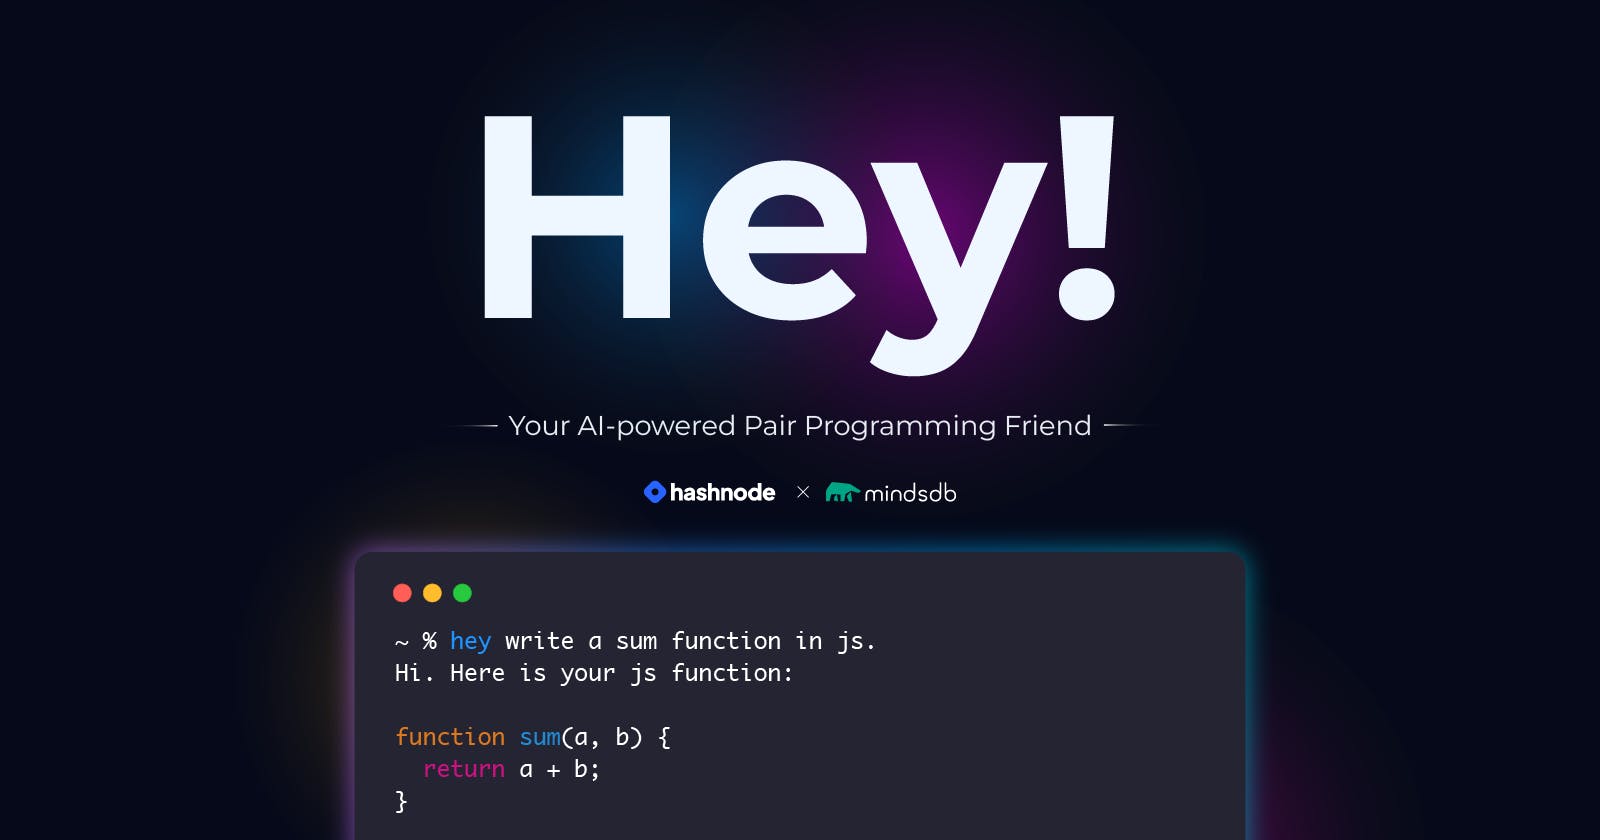 Introducing Hey! - Your AI-powered Pair Programming Friend